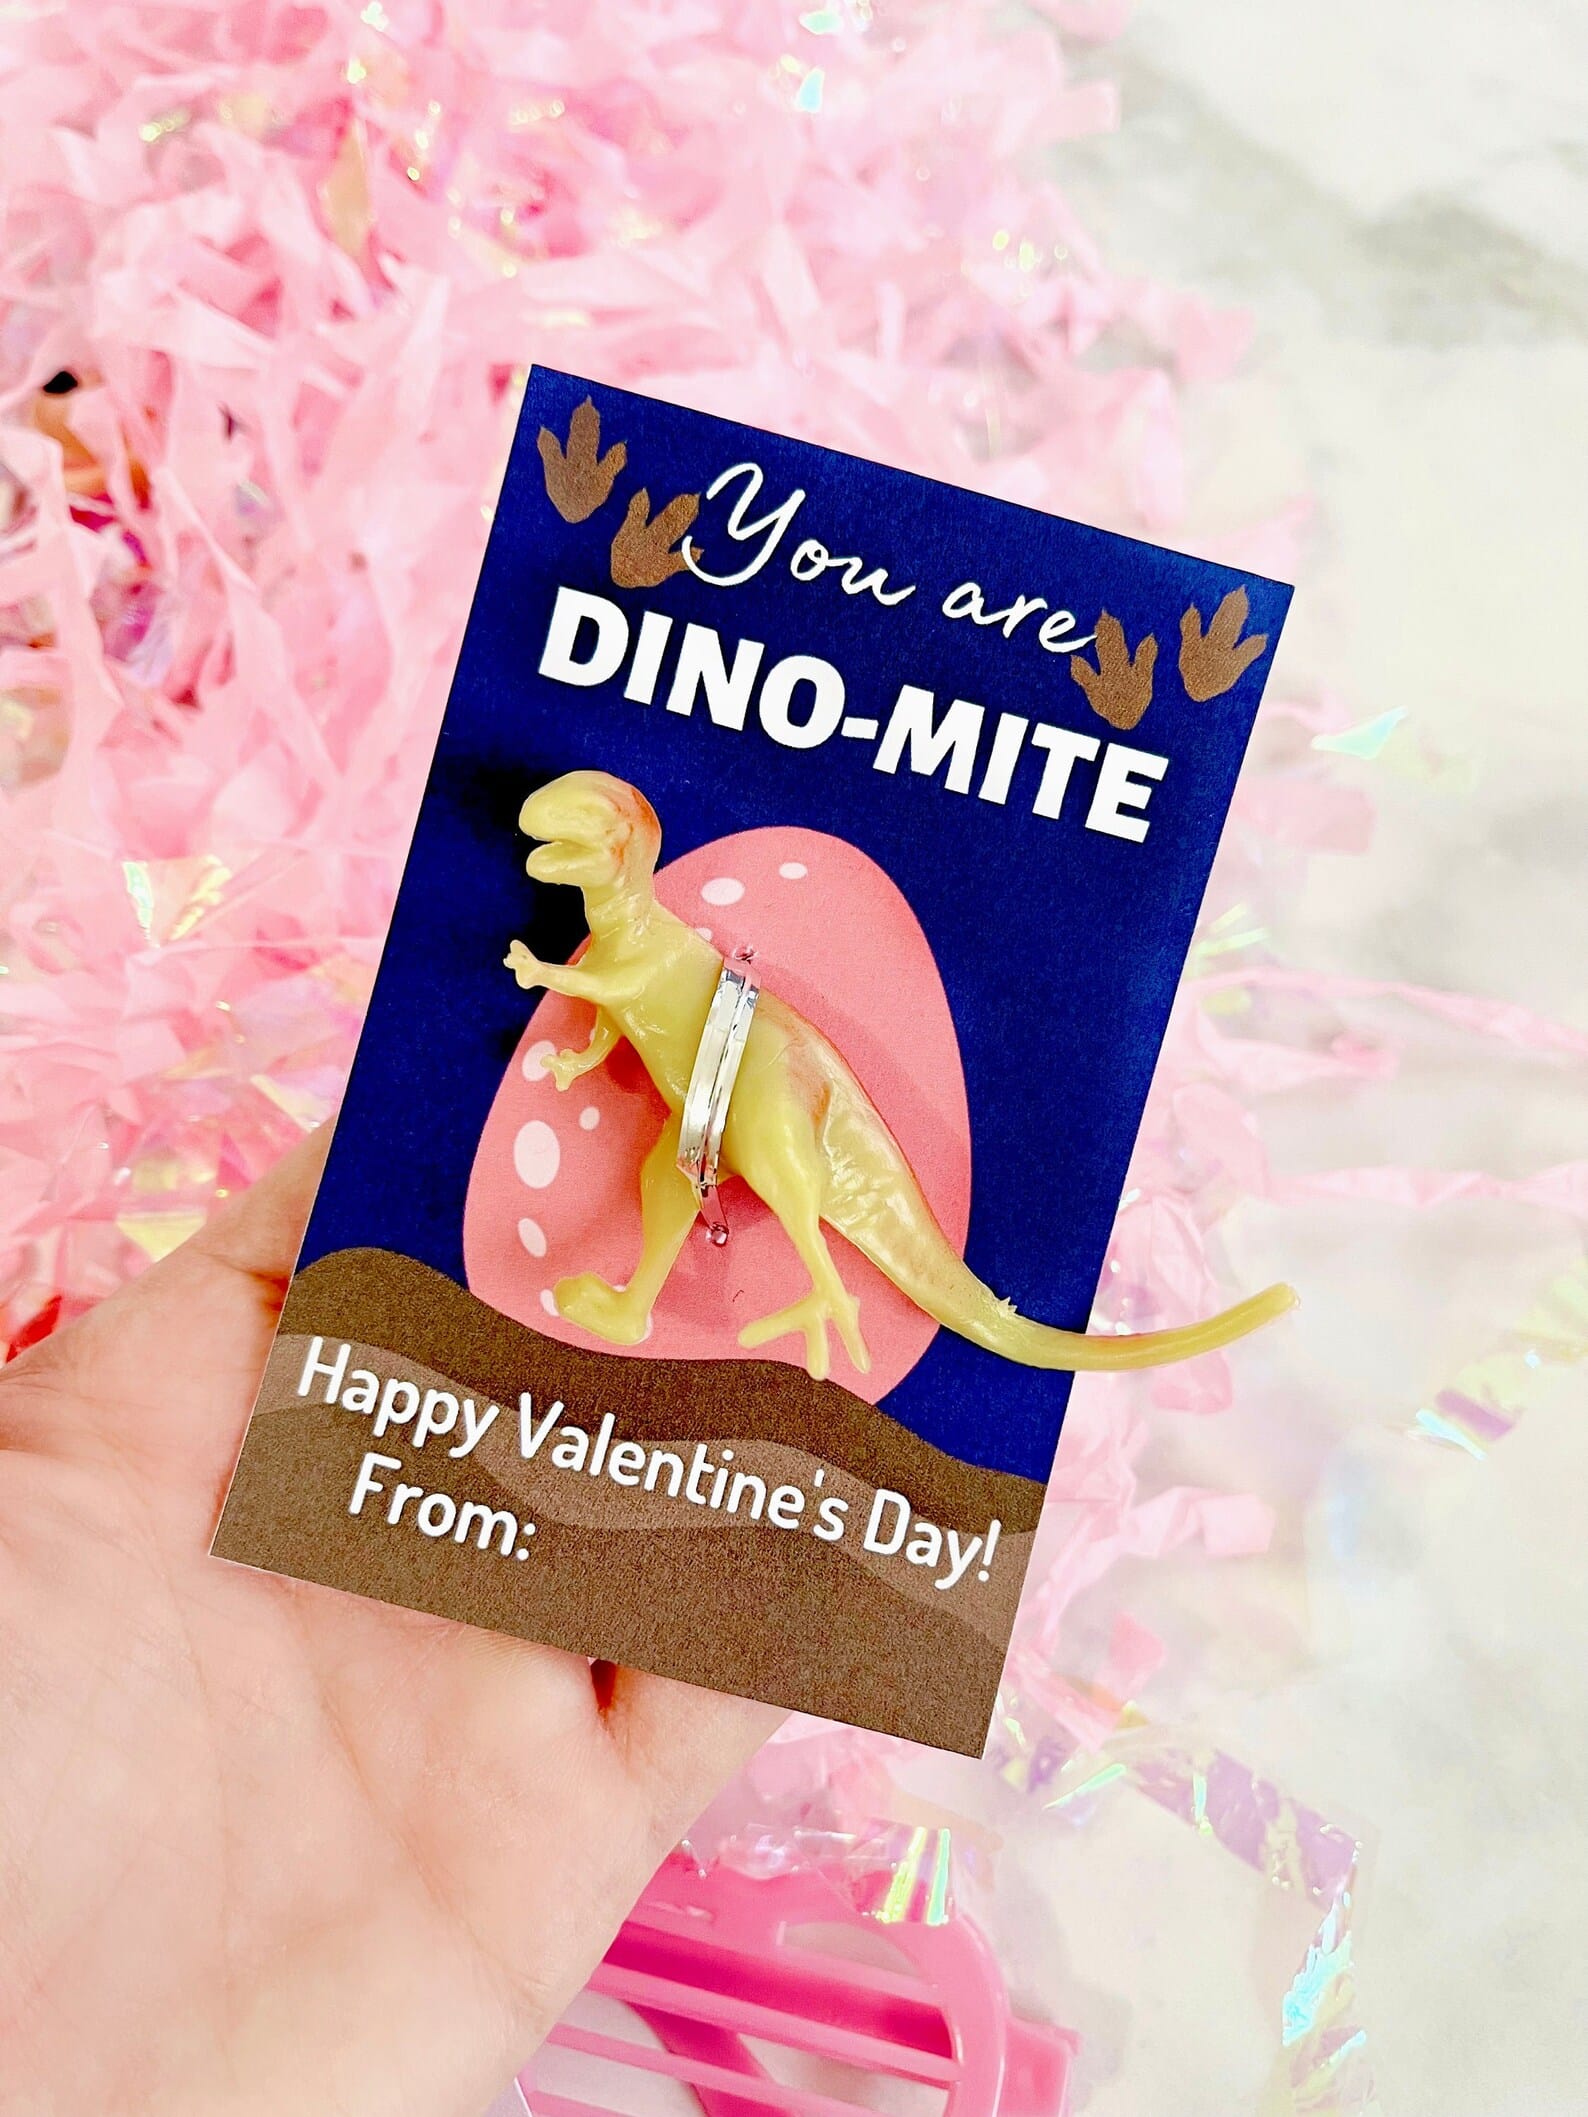 You are dino-mite Valentine's Day card with toy dinosaur figurine 